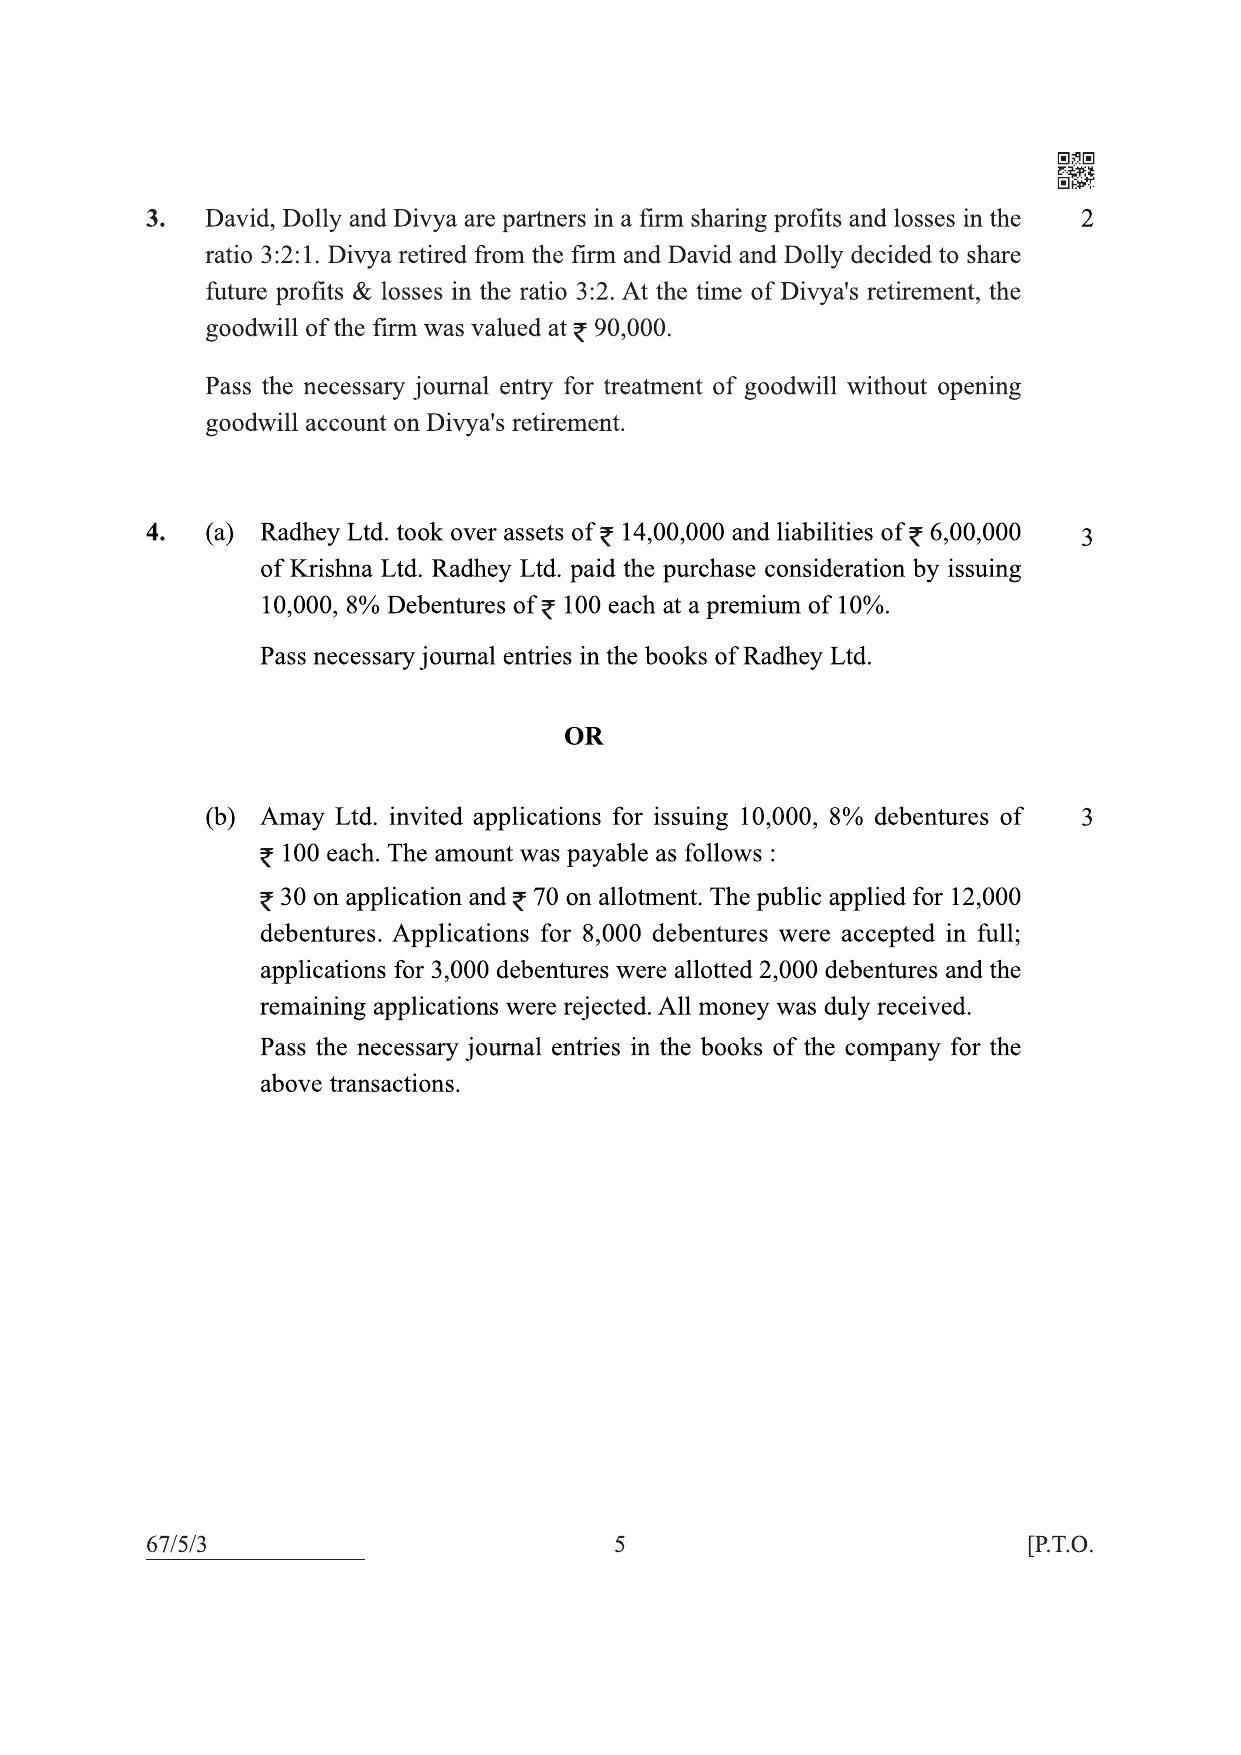 CBSE Class 12 67-5-3 Accountancy 2022 Question Paper - Page 5